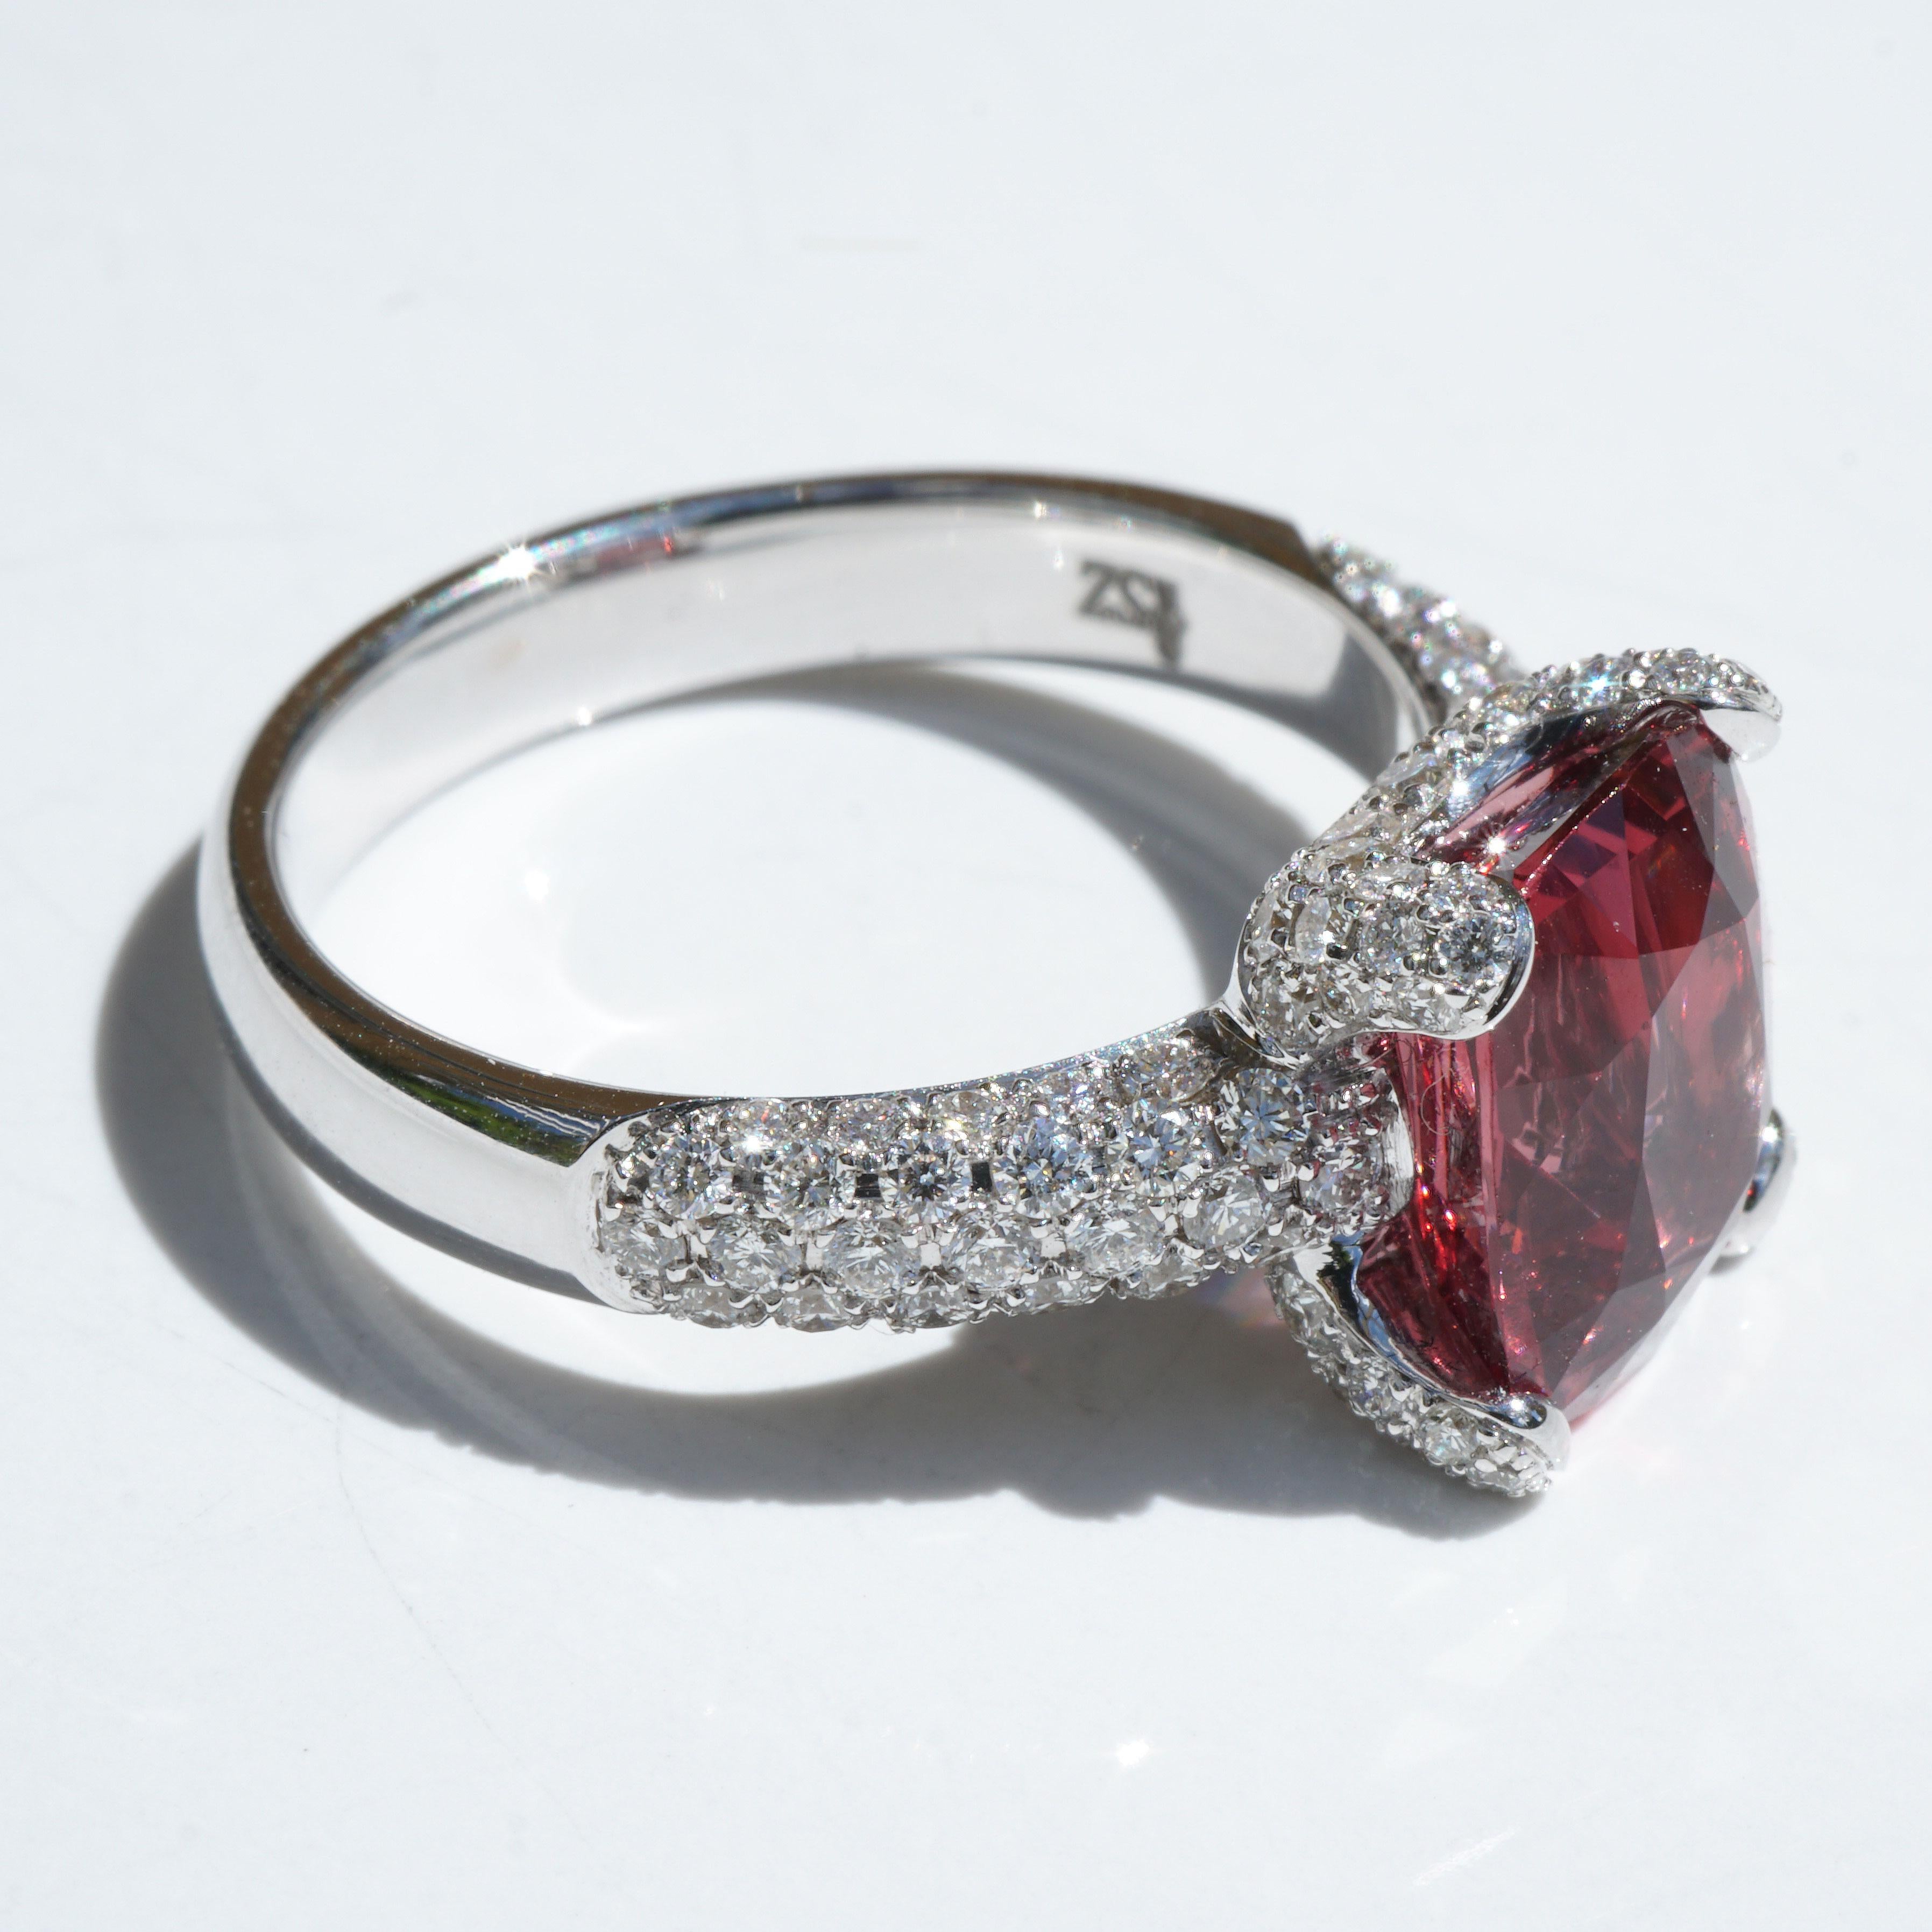 Women's or Men's 3.65 ct AAA+ Red Spinel Brilliant Ring  White Gold Mine Badachshan Afghanistan 